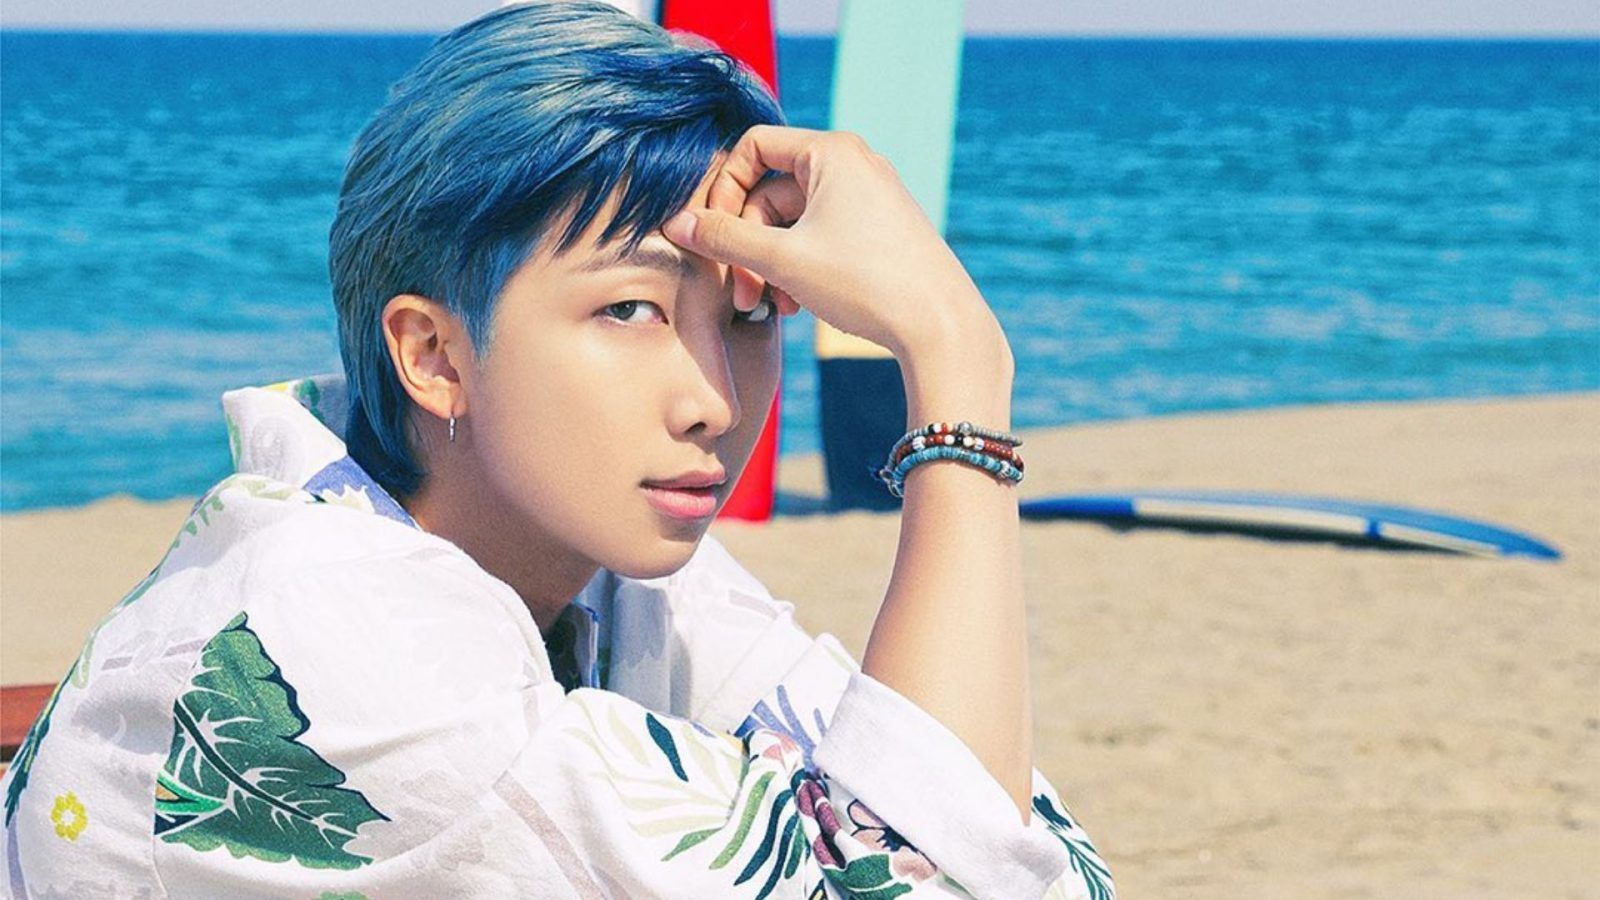 Luxurious things owned by BTS' members RM, Jungkook, V, Suga